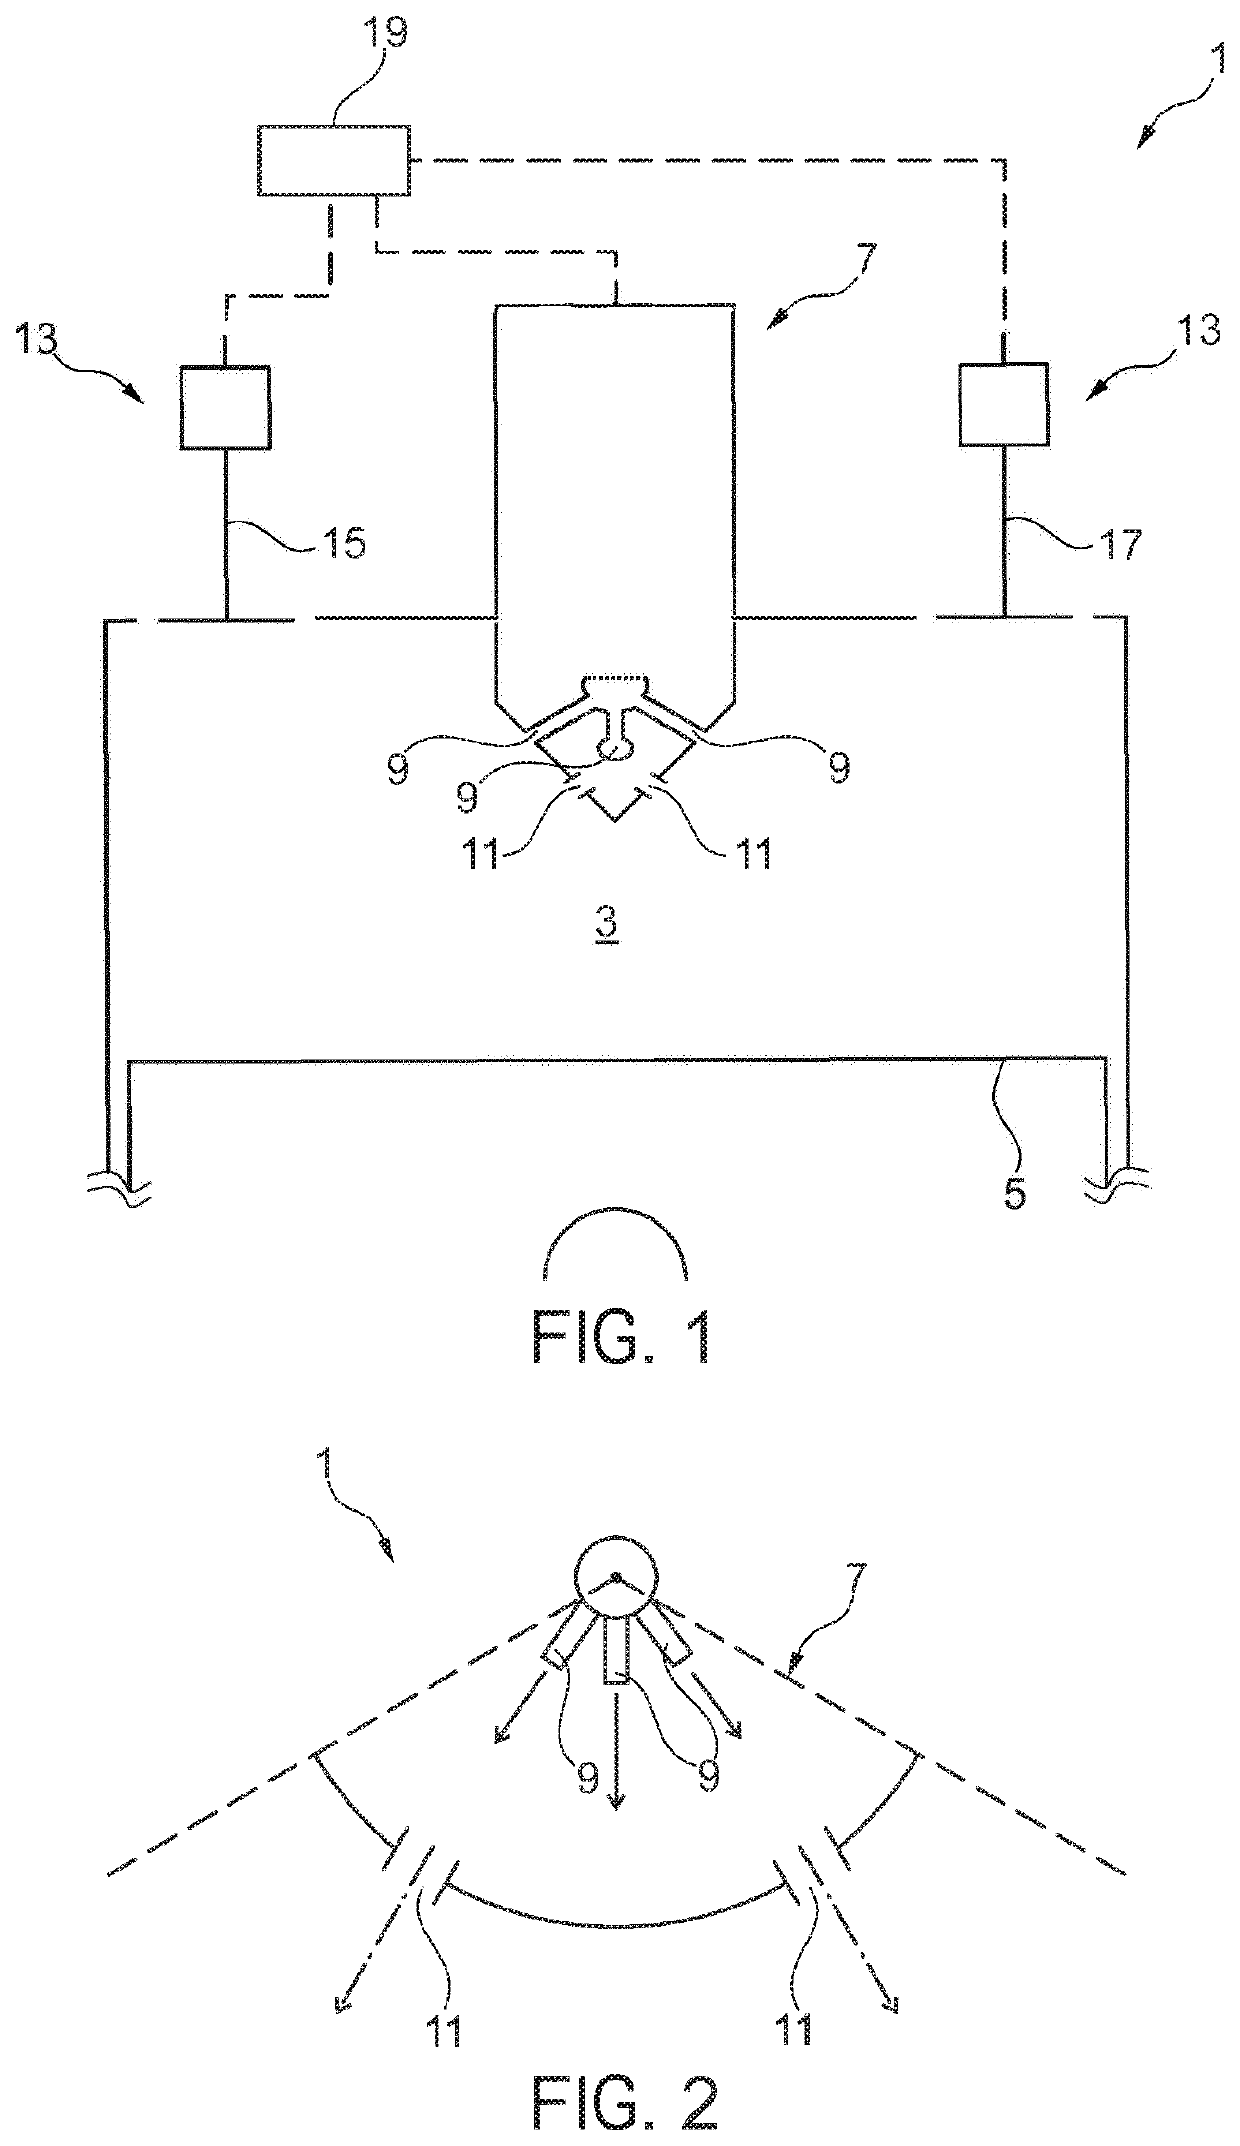 Method for operating an internal combustion engine, dual fuel injector device, and internal combustion engine designed for carrying out such a method